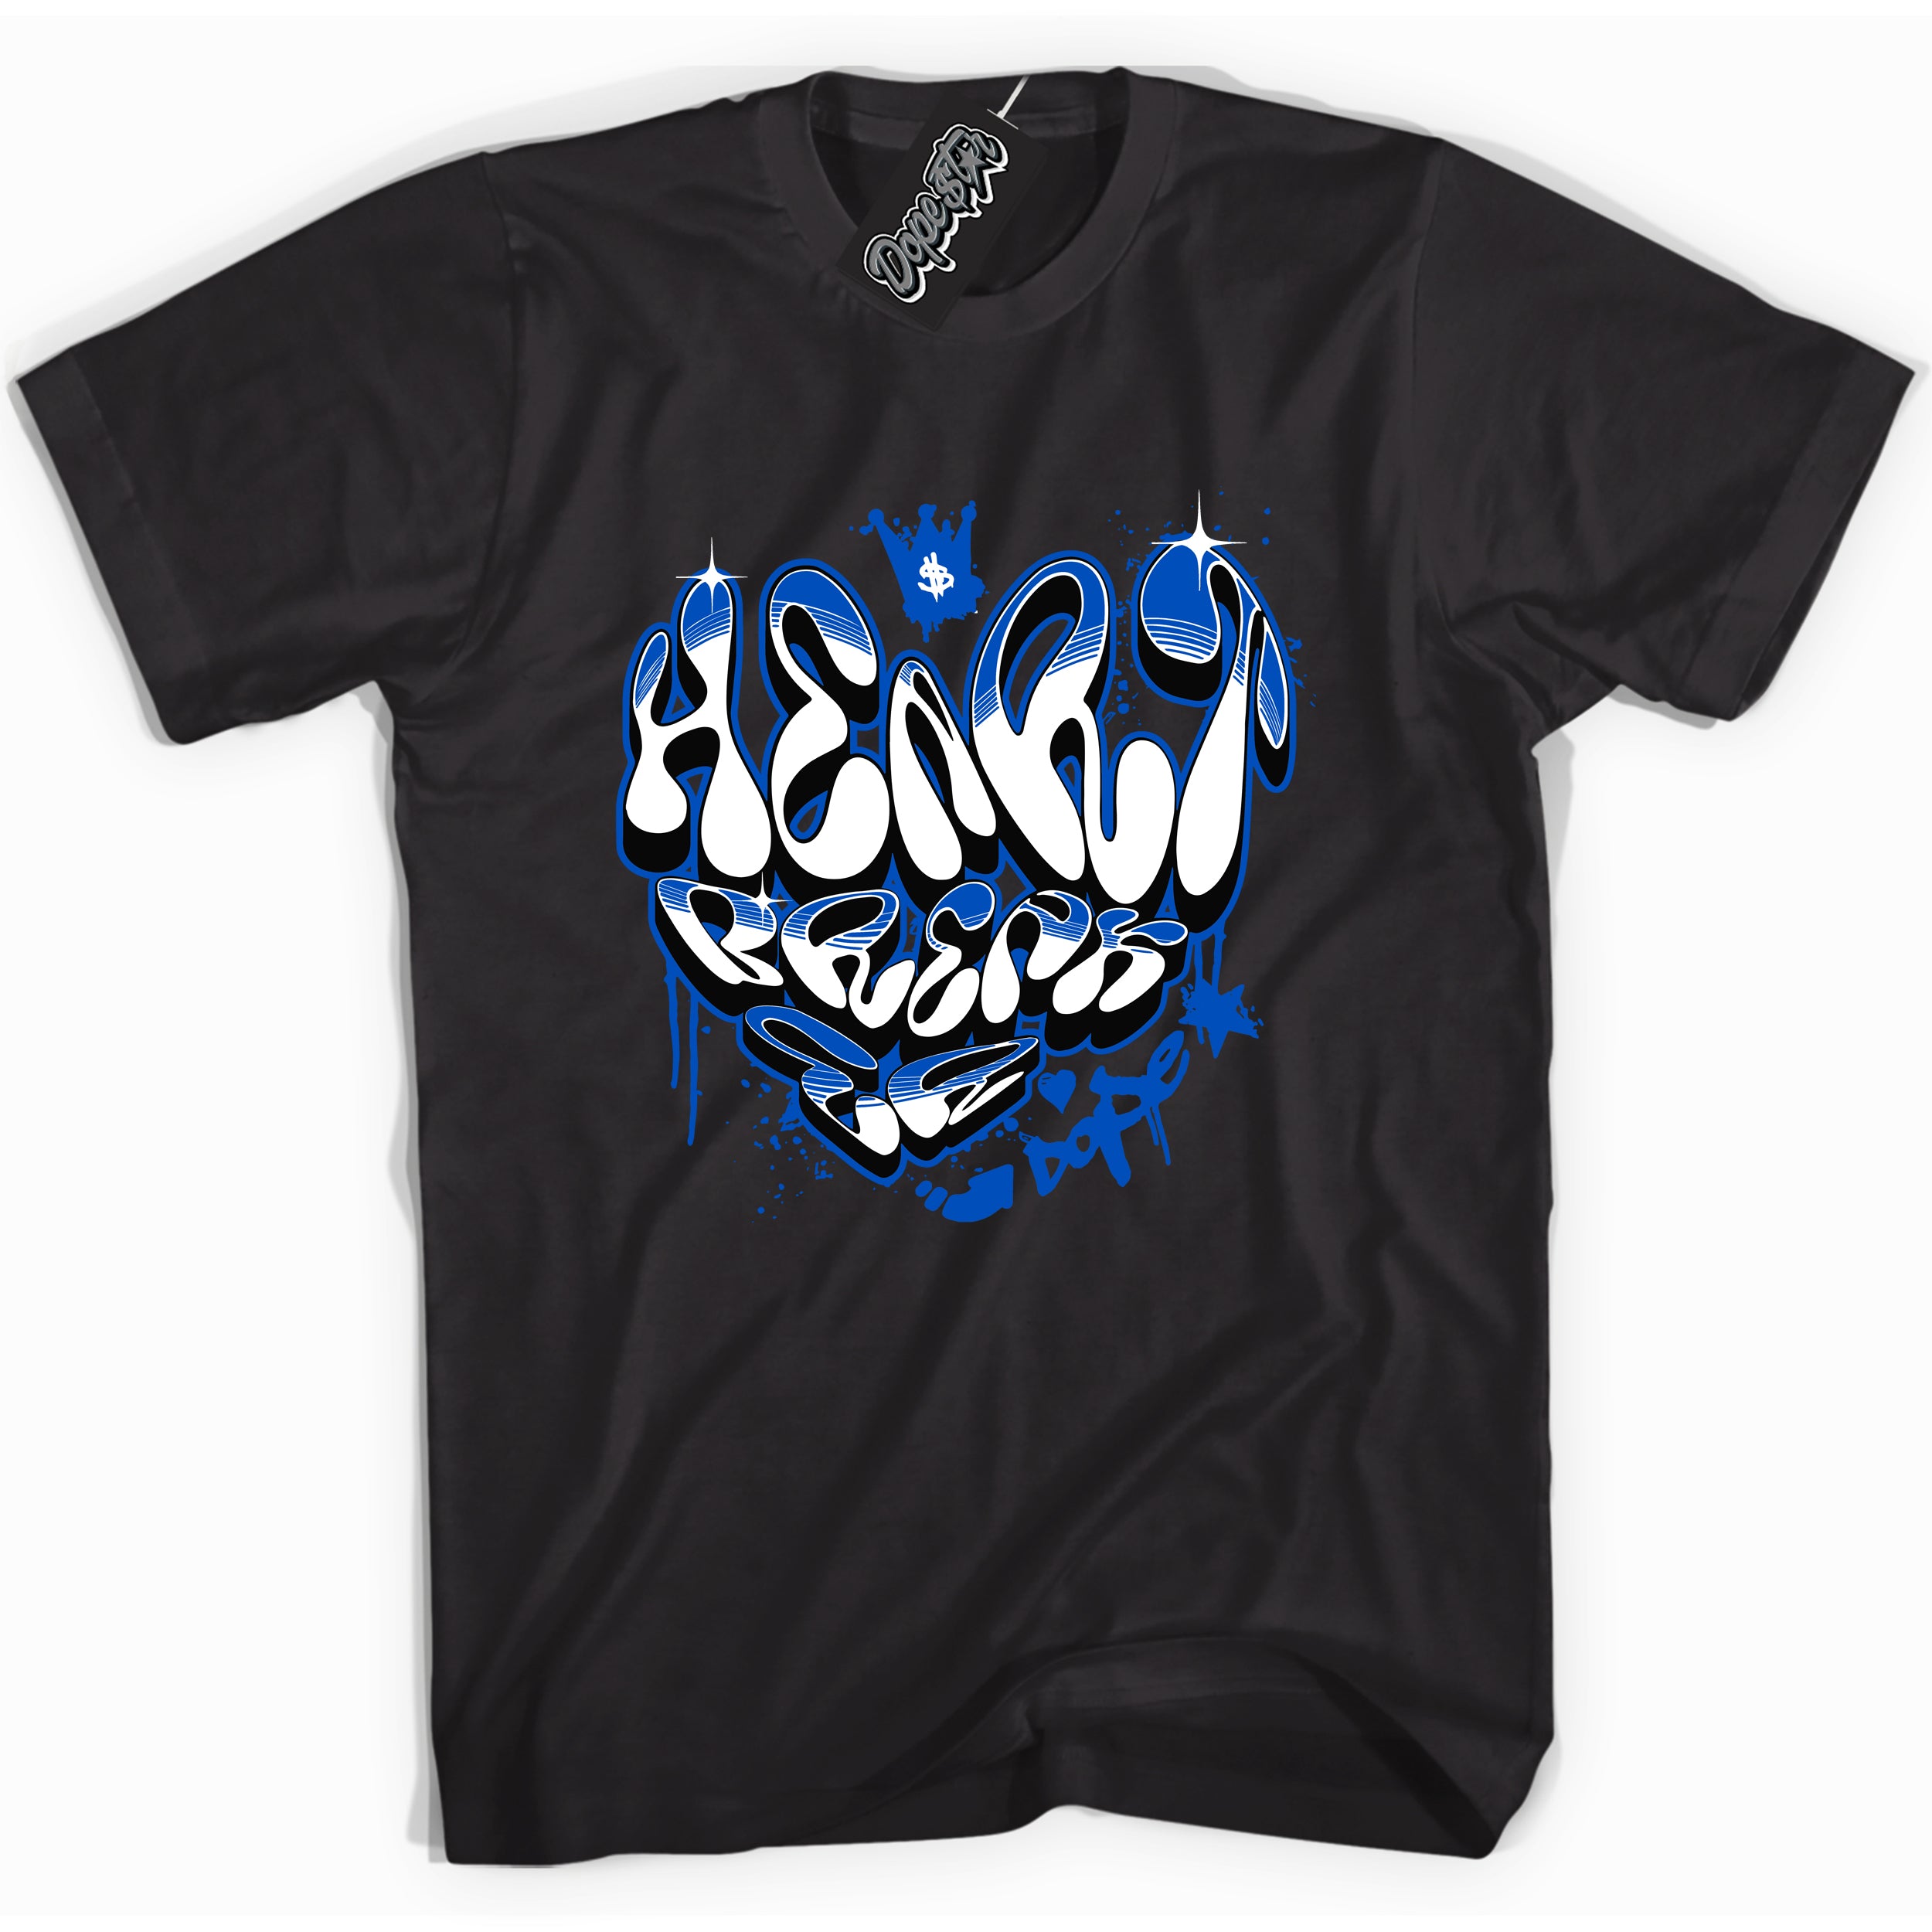 Cool Black graphic tee with Heartbreaker Graffiti print, that perfectly matches OG Royal Reimagined 1s sneakers 